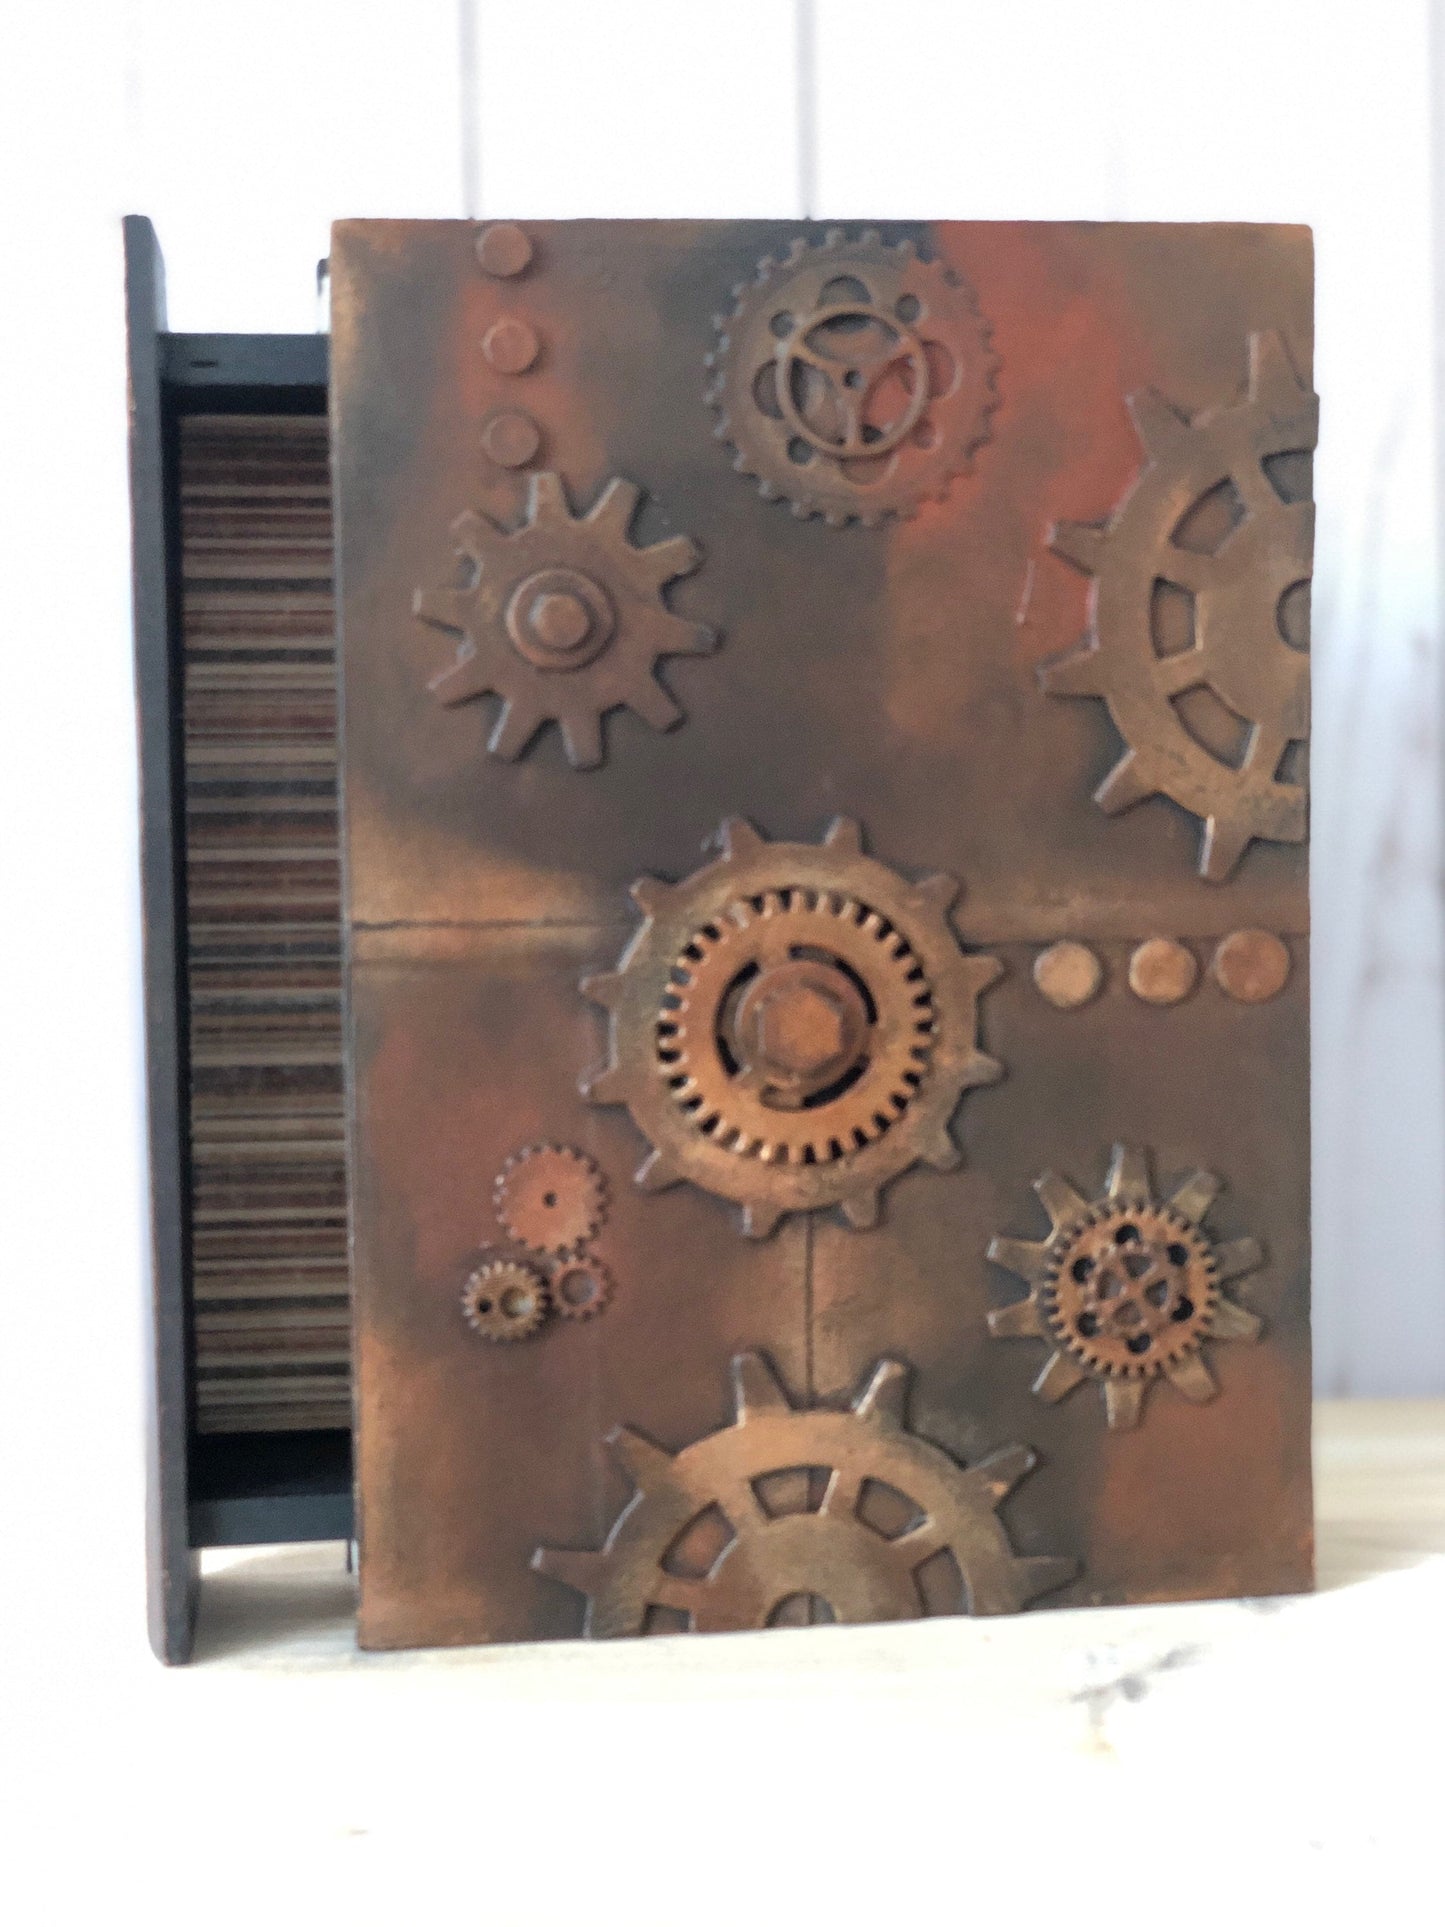 Steampunk jewelry box for Mechanic, Secret Drawer Book Box, Fantasy gift for boyfriend, Cogs and Gears Decorative Box Industrial Home Decor